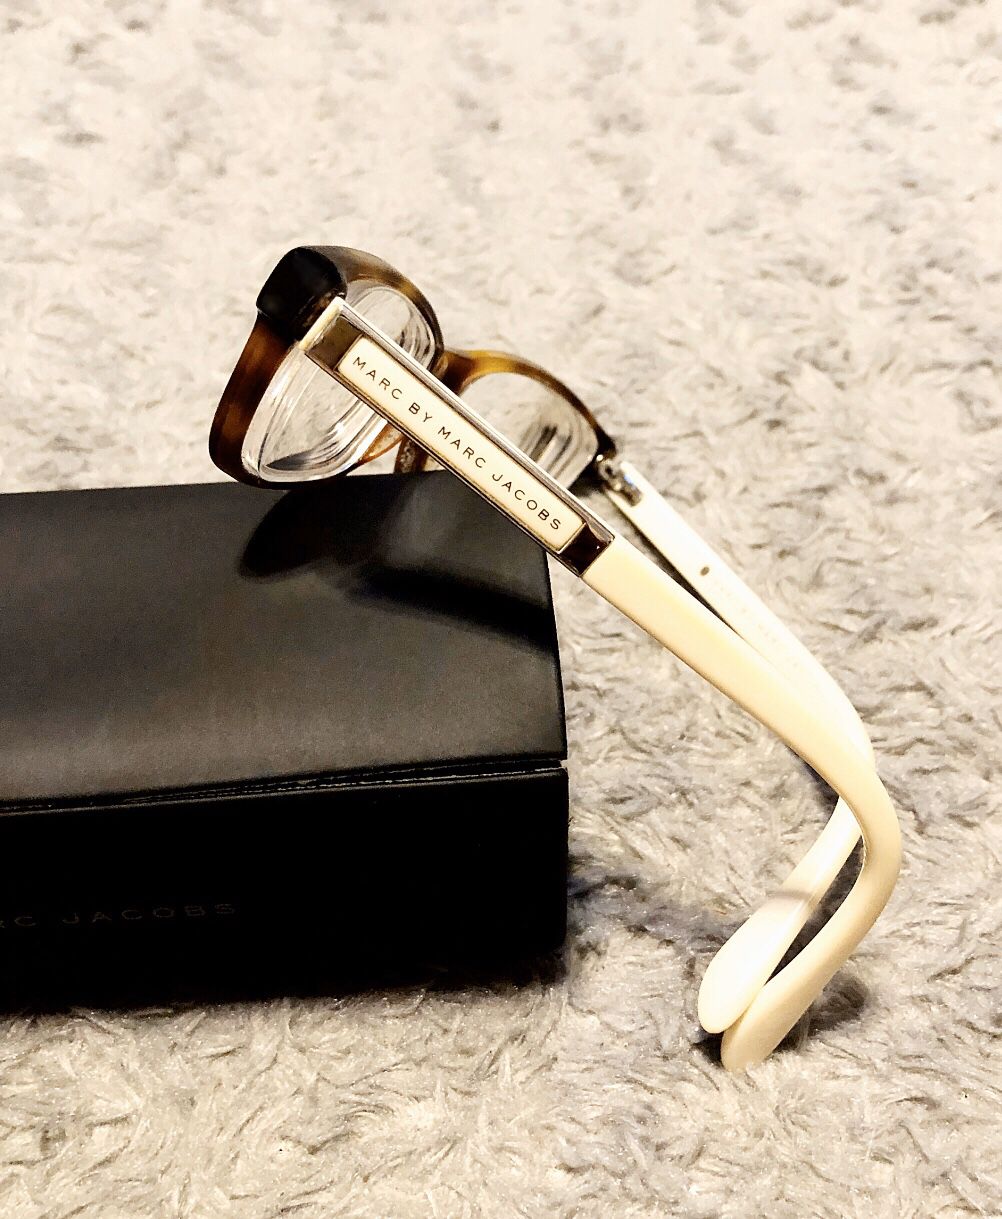 Marc By Marc Jacobs glasses paid $180 Great Condition! An ultra sophisticated look that brings retro glamour to eyewear. Color Havana Cream, rectangu